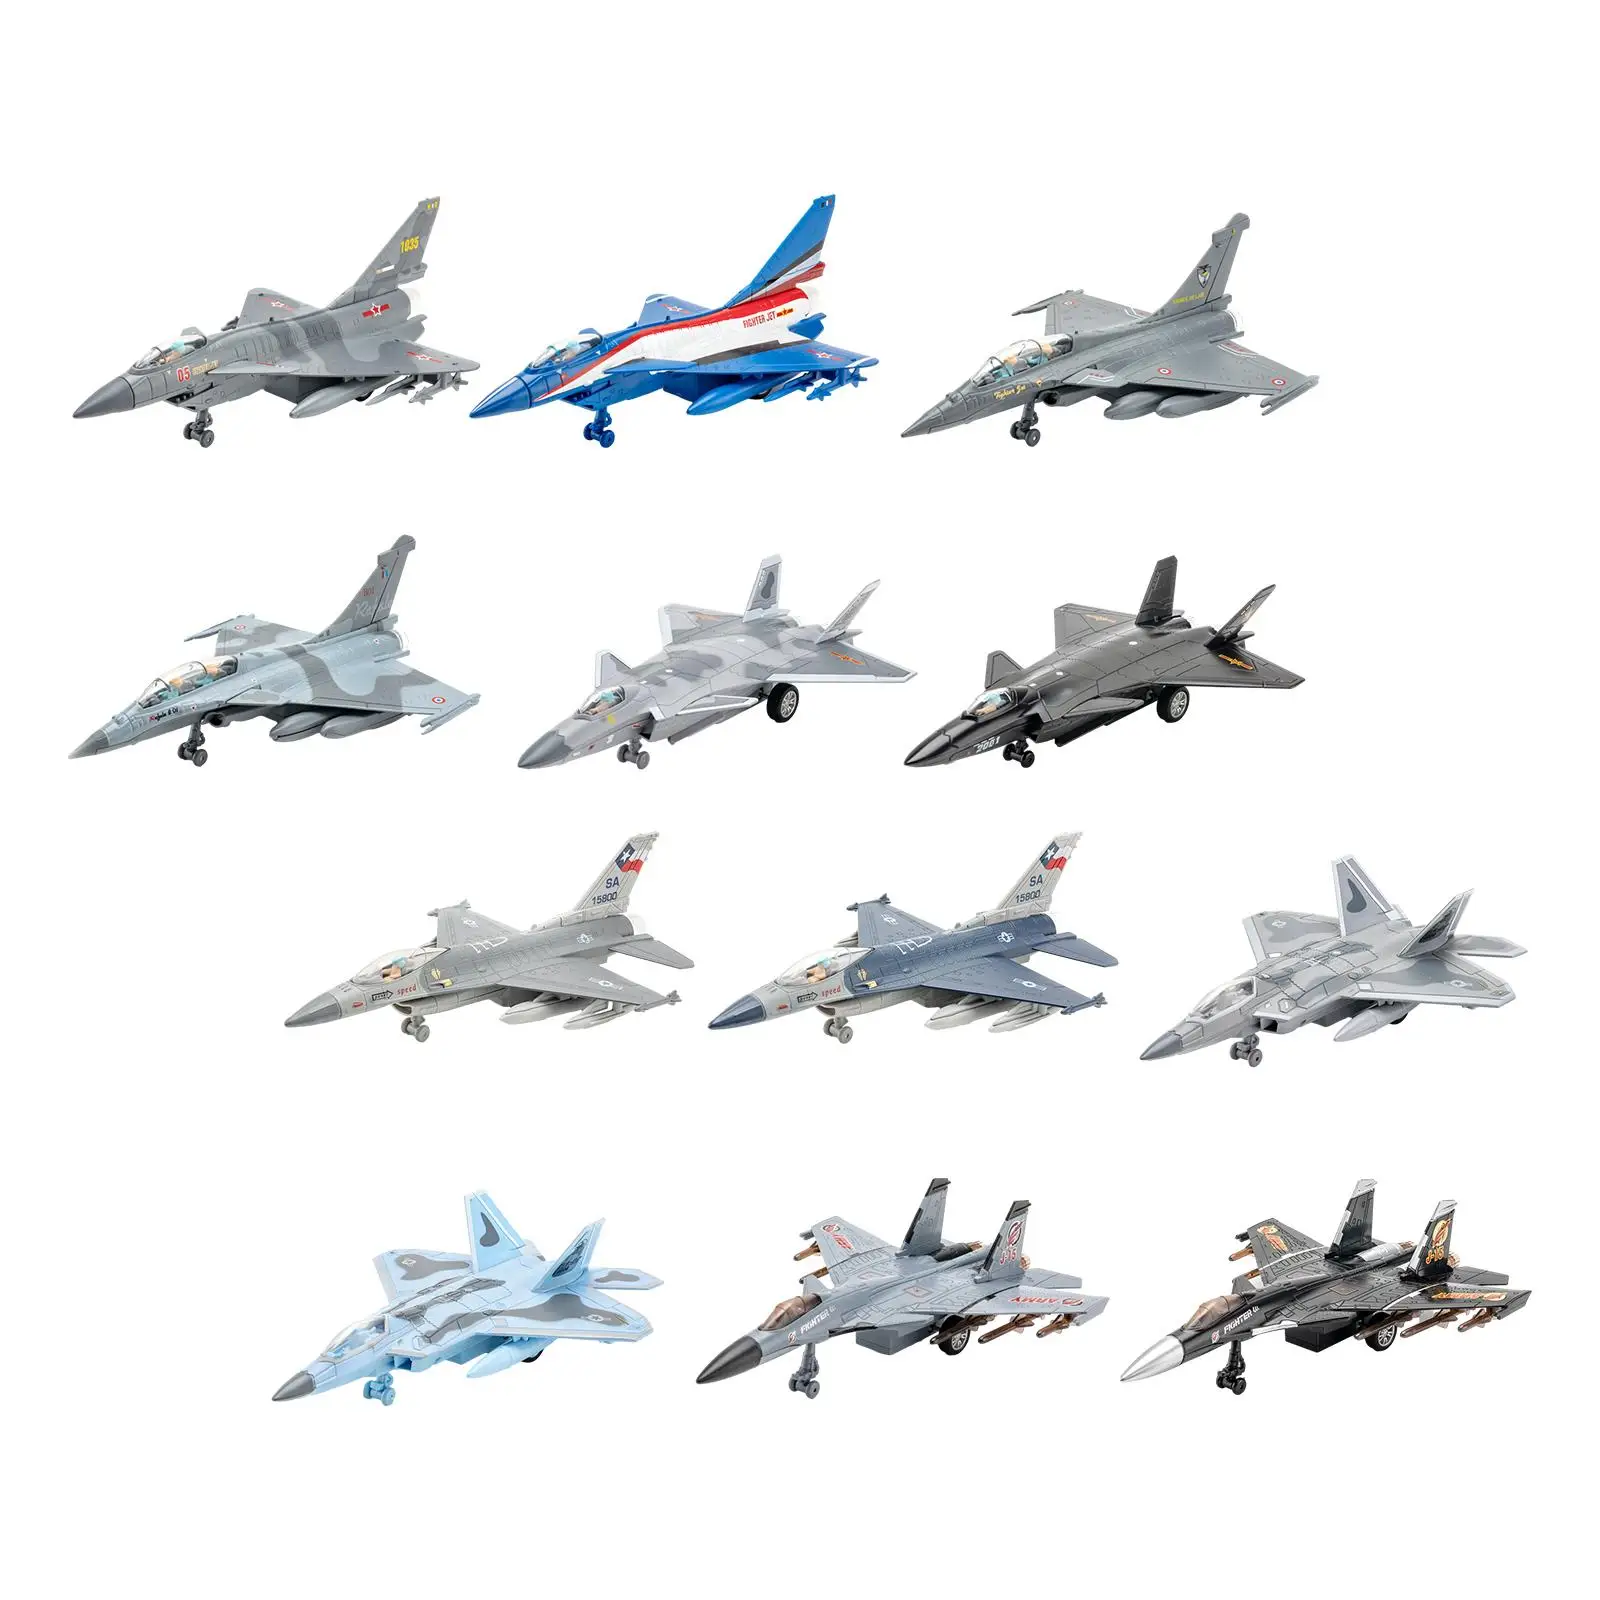 

Diecast Fighter Jet Collectables Ornament Pretend Play with Lights Sounds for Kids Toys Holiday Gifts Keepsake Tabletop Shelves